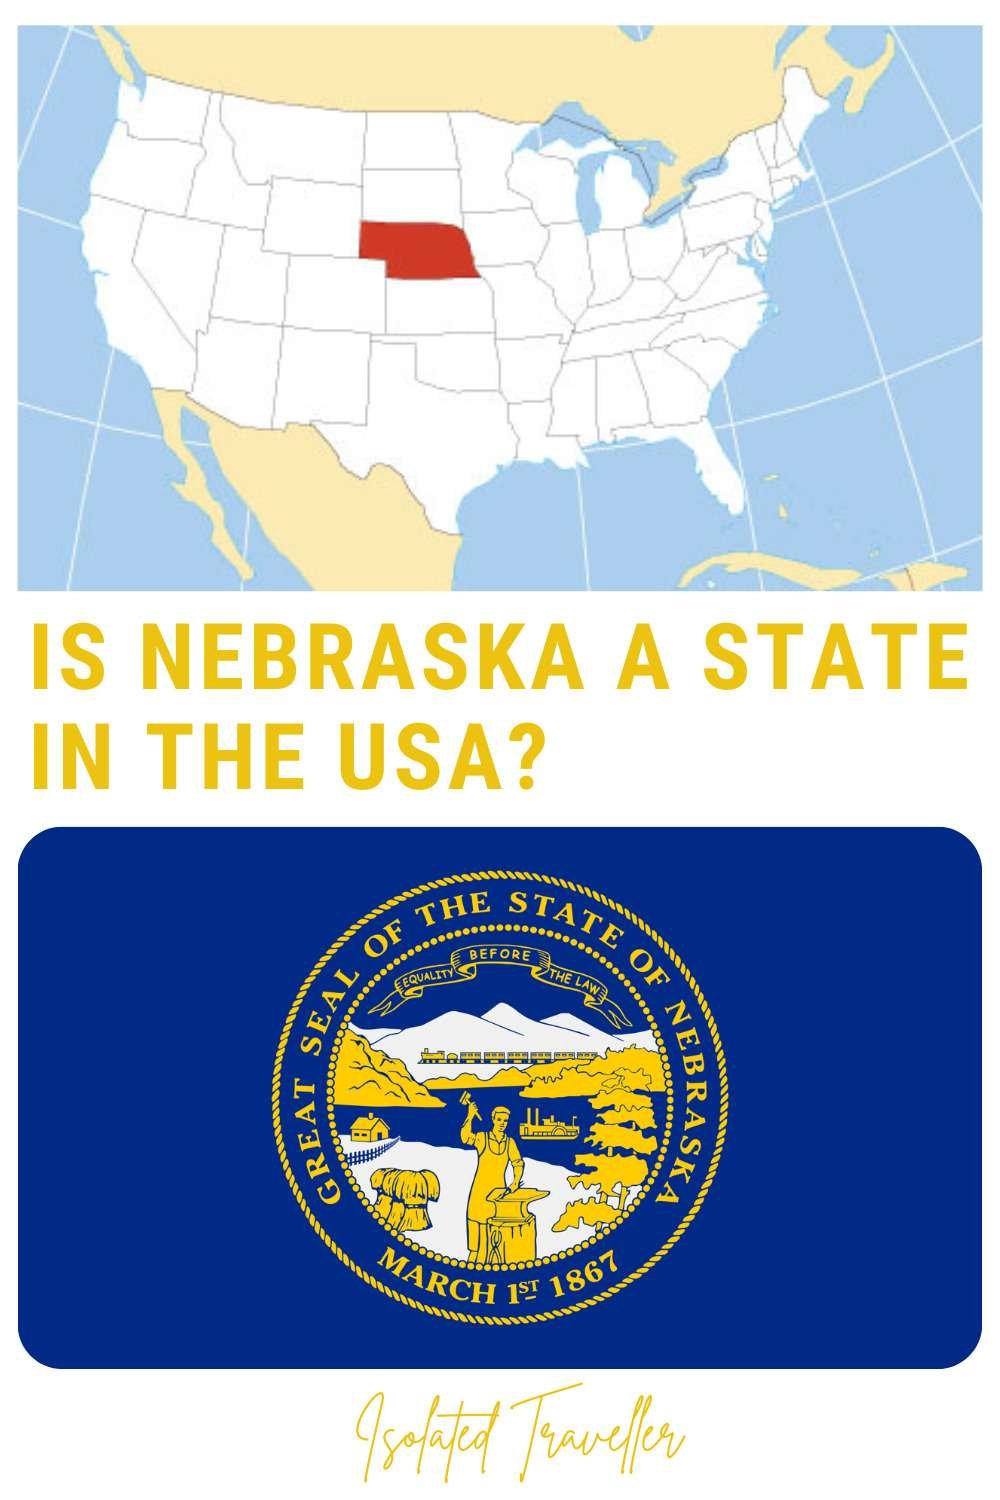 Is Nebraska a state in the USA?